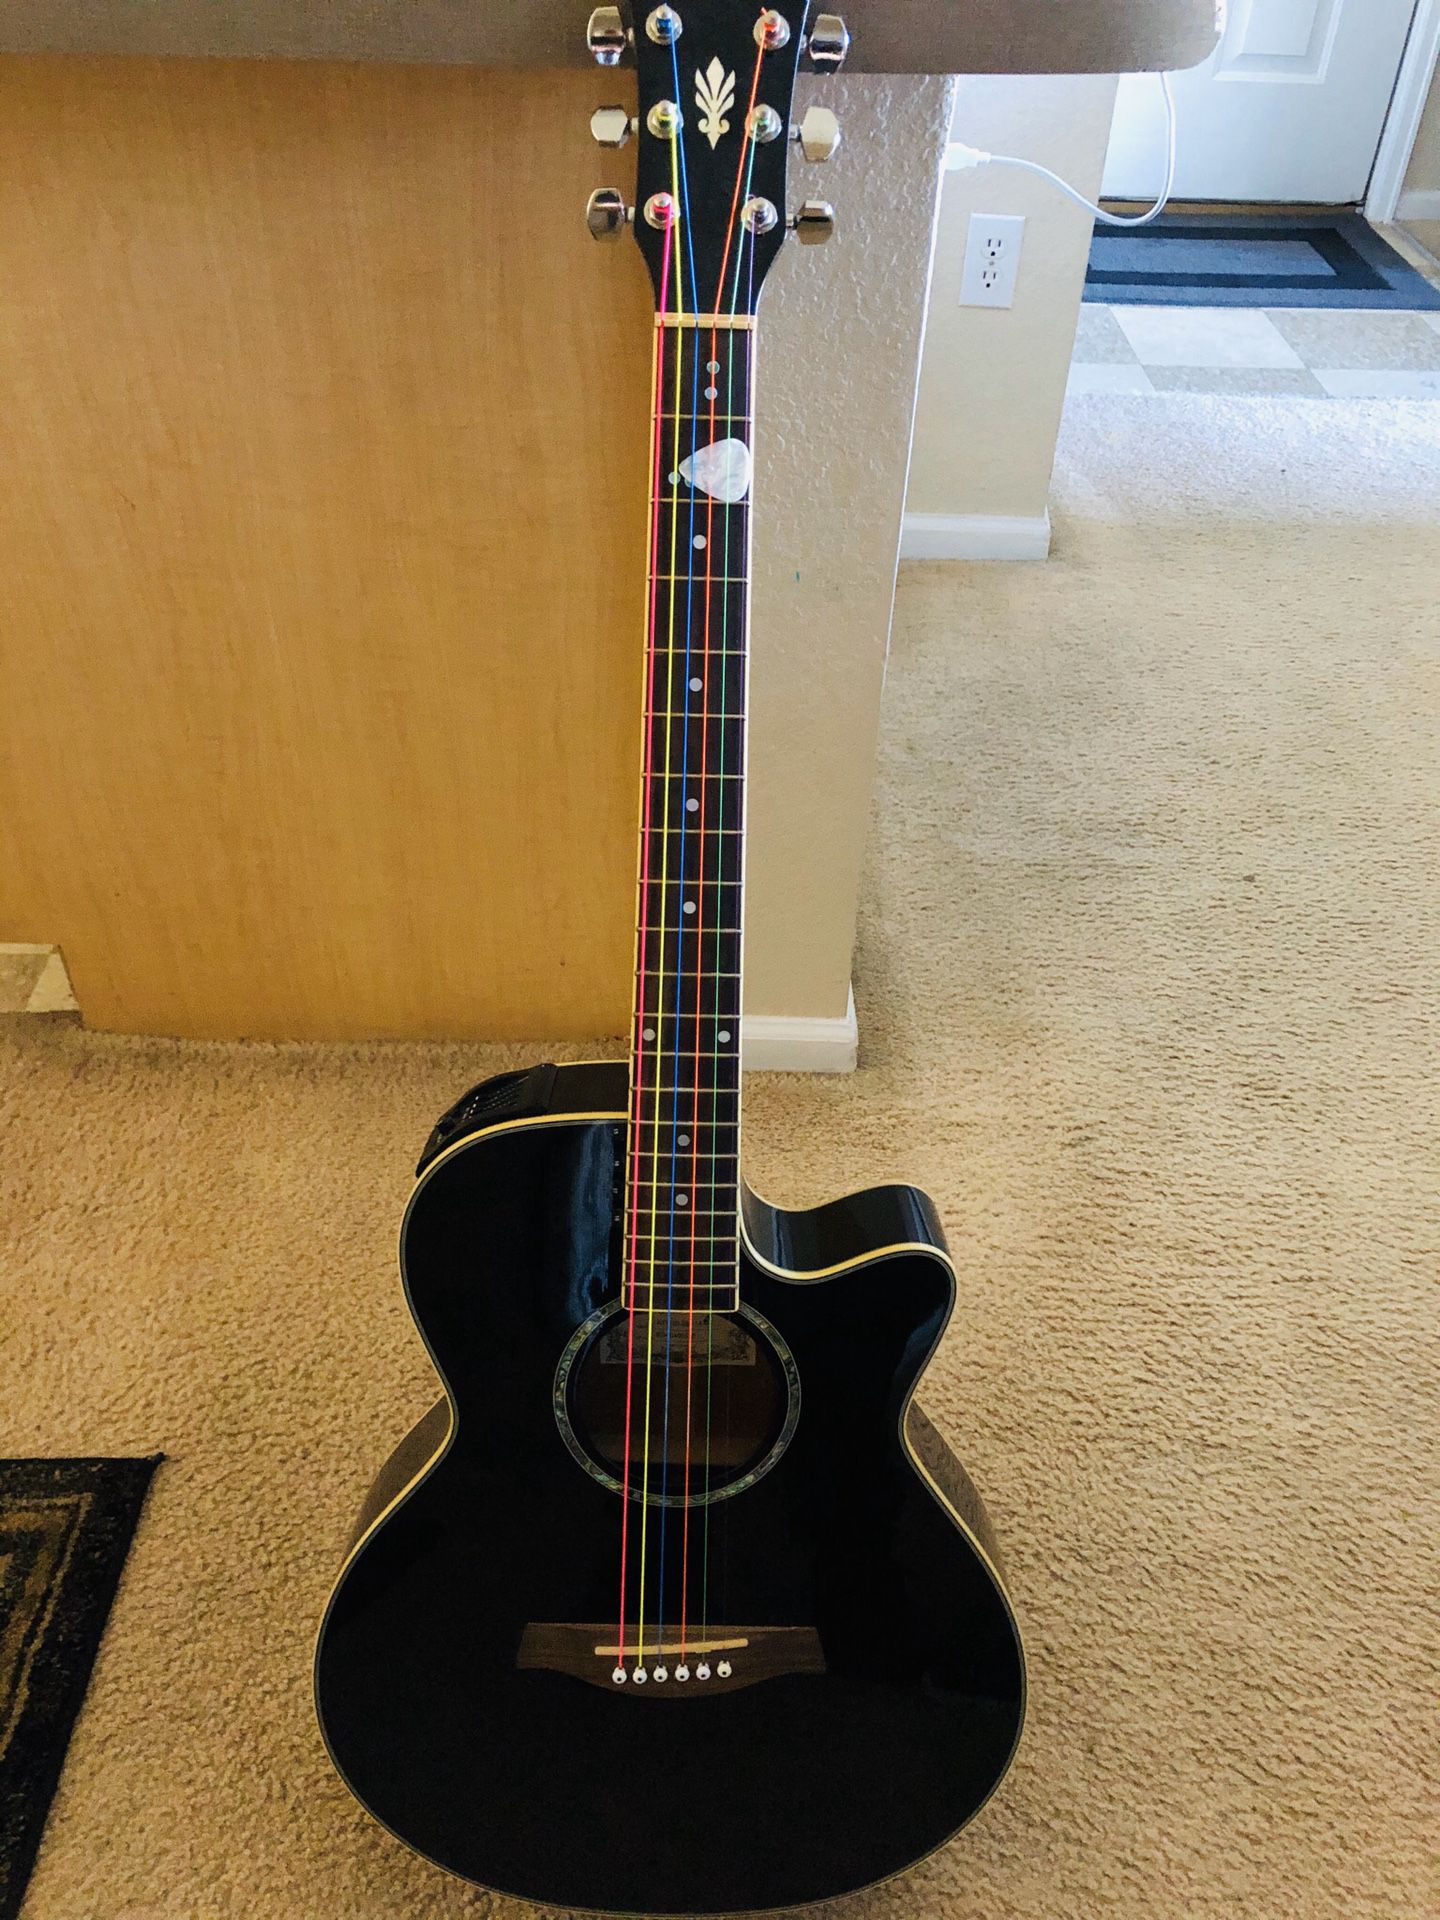 Ibanez acoustic electric guitar